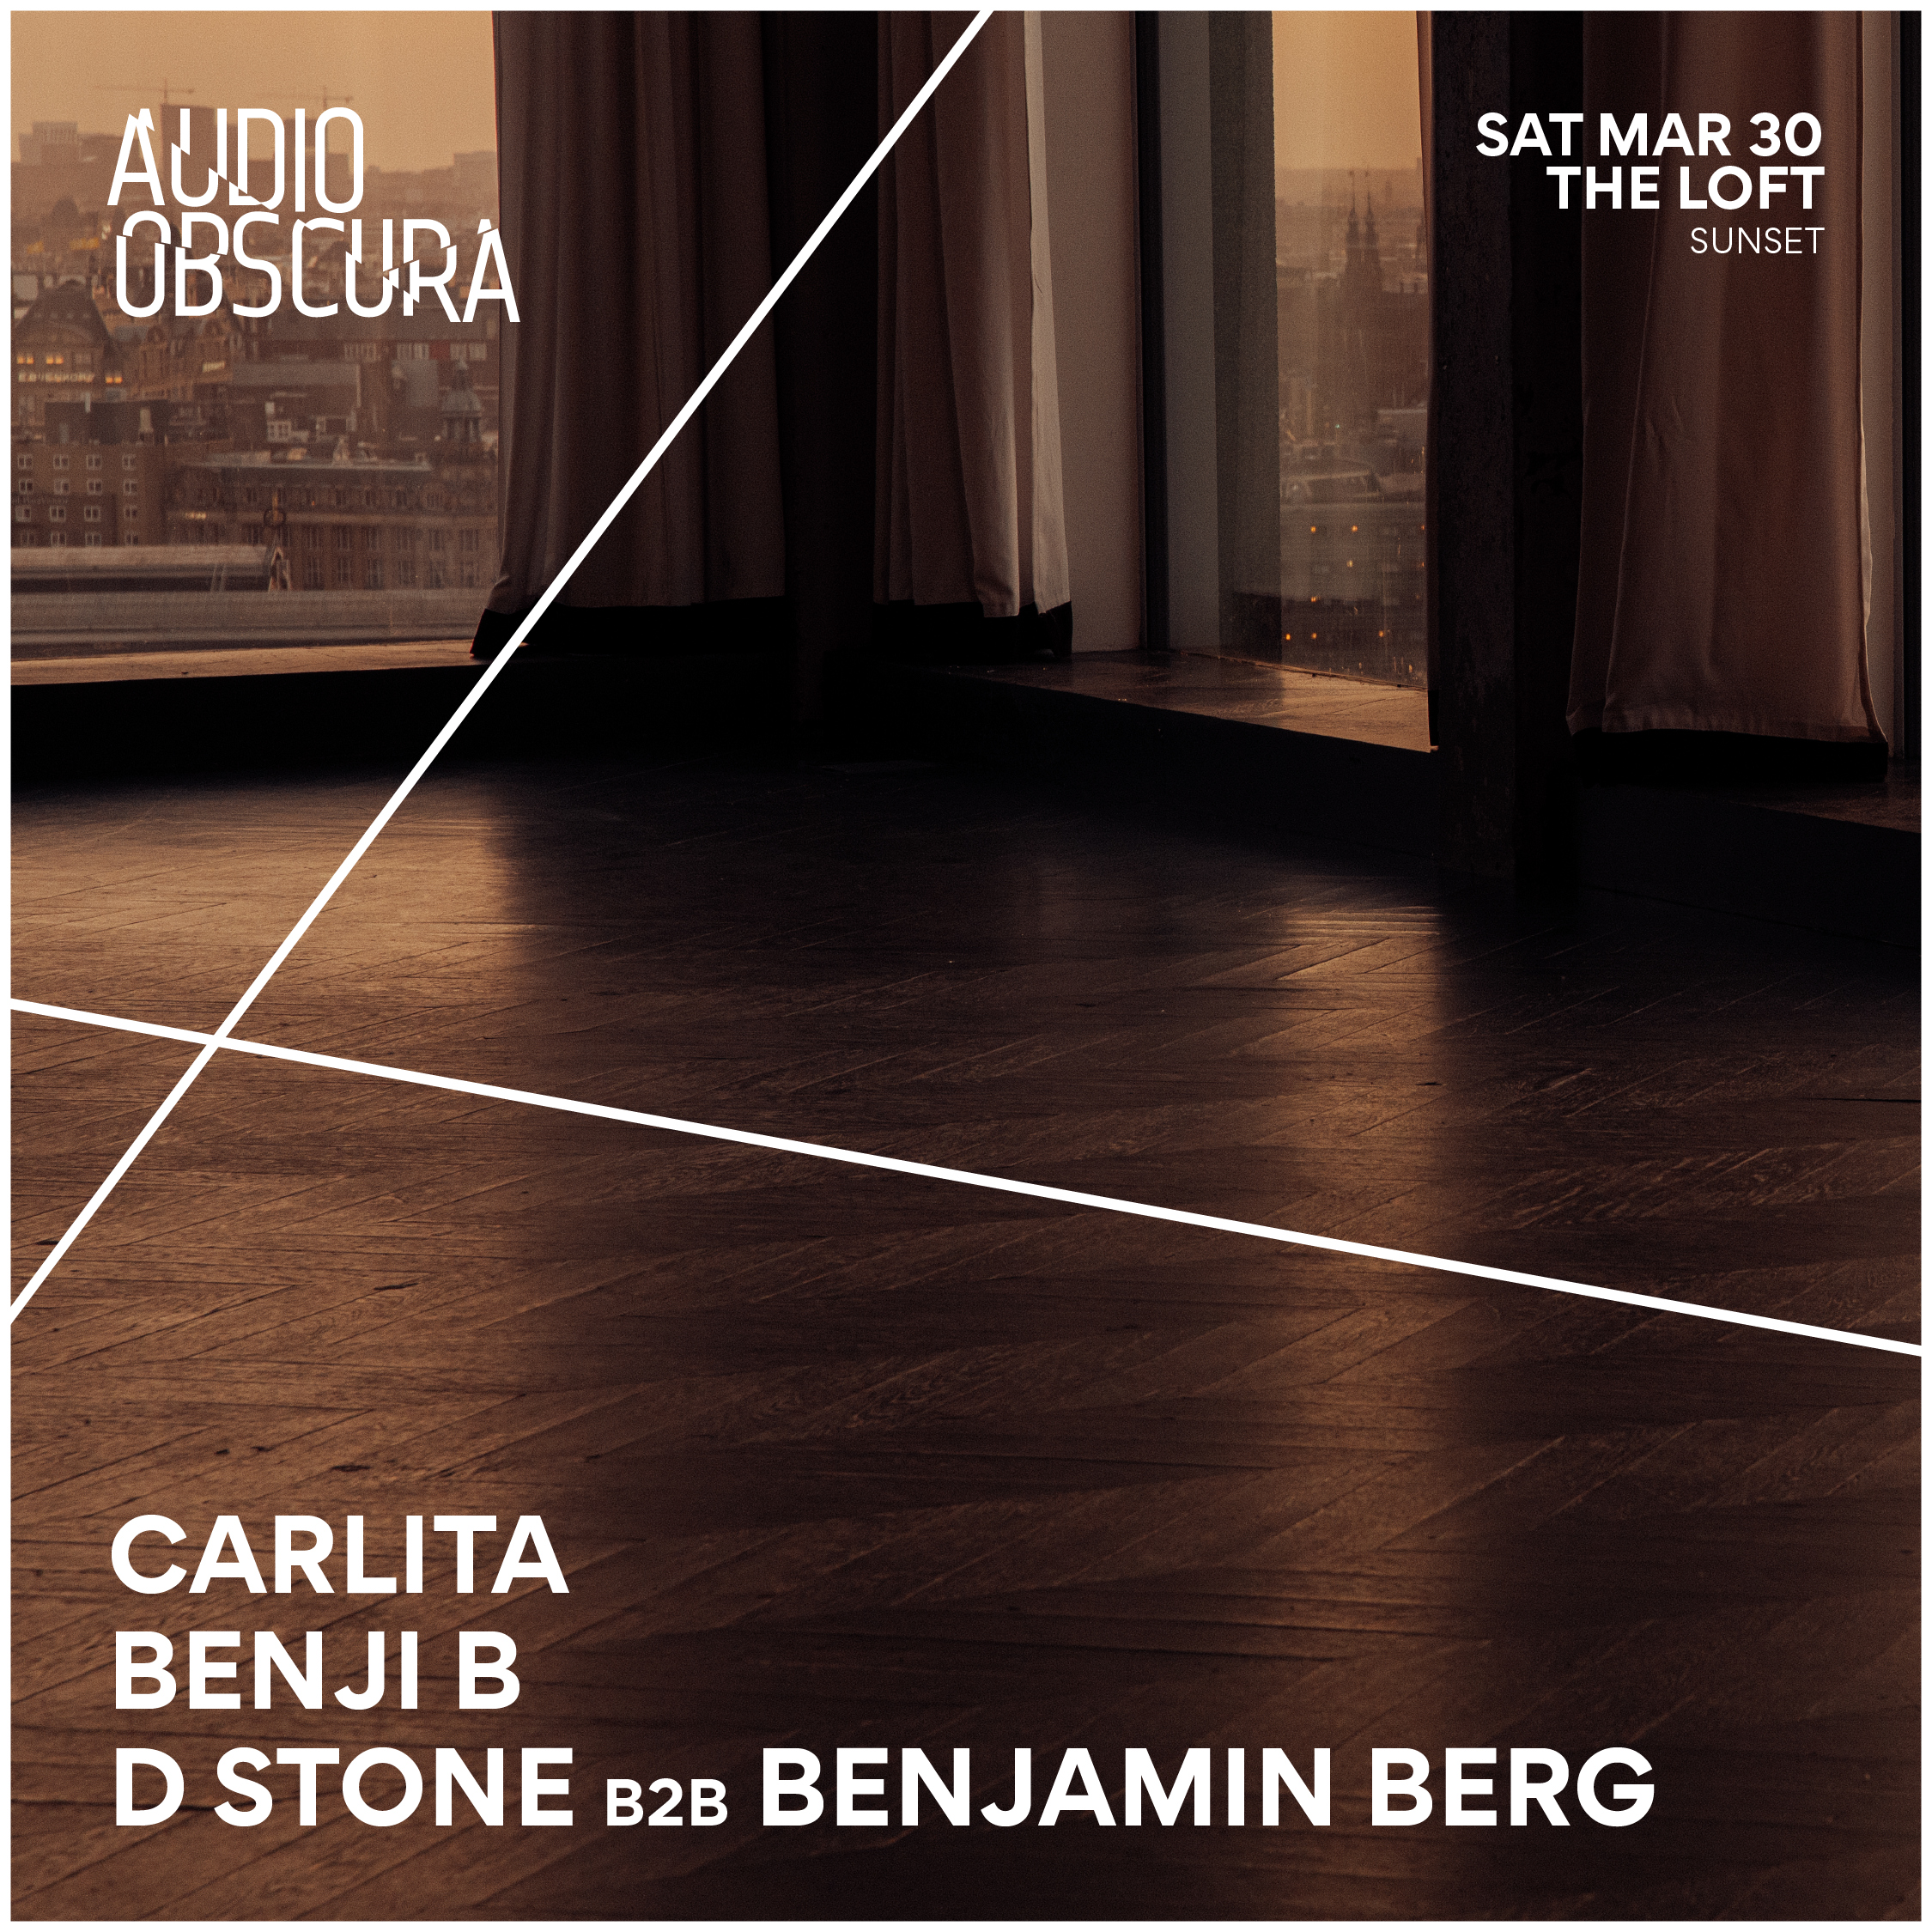 Audio Obscura at The Loft Easter Special with Carlita - Página frontal